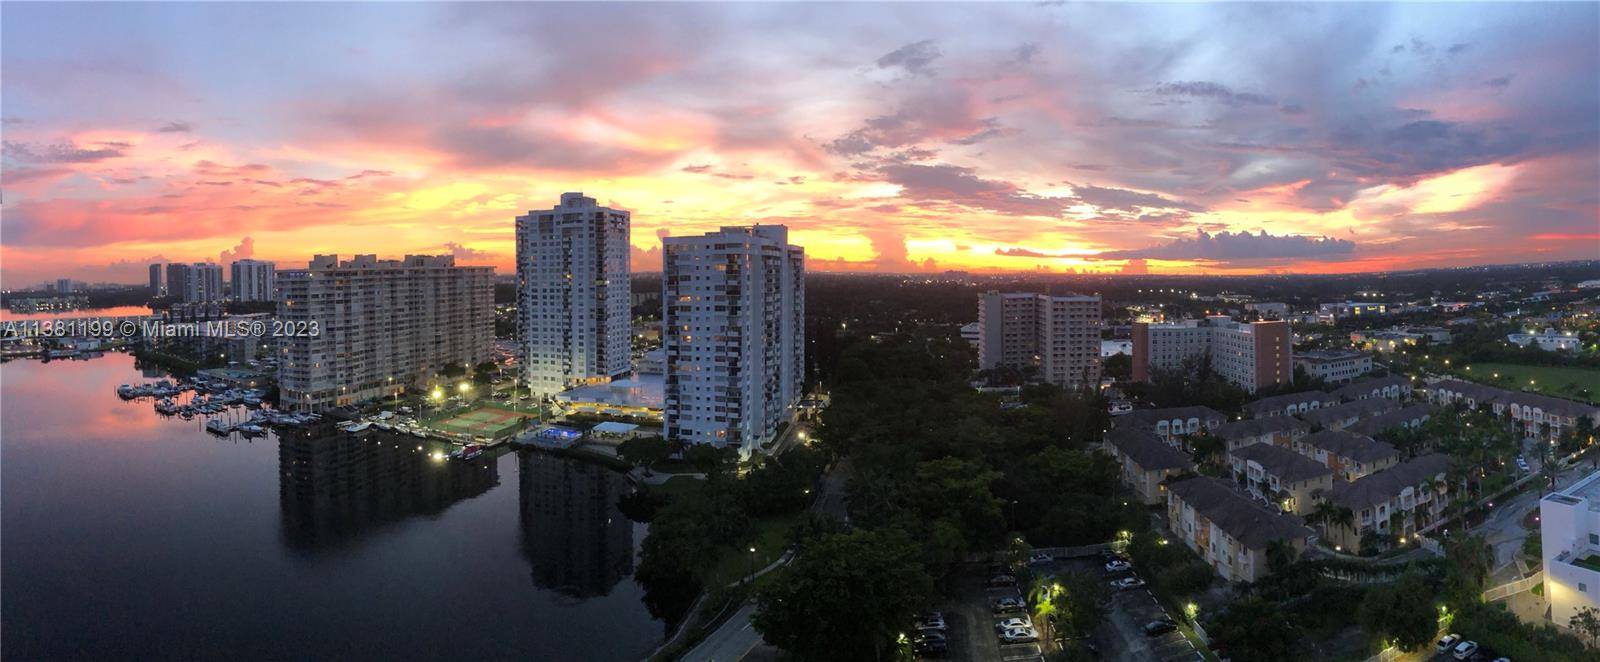 Located next to Williams Island, 2 bedrooms 2 bath condo in one of the best residential areas in Aventura.